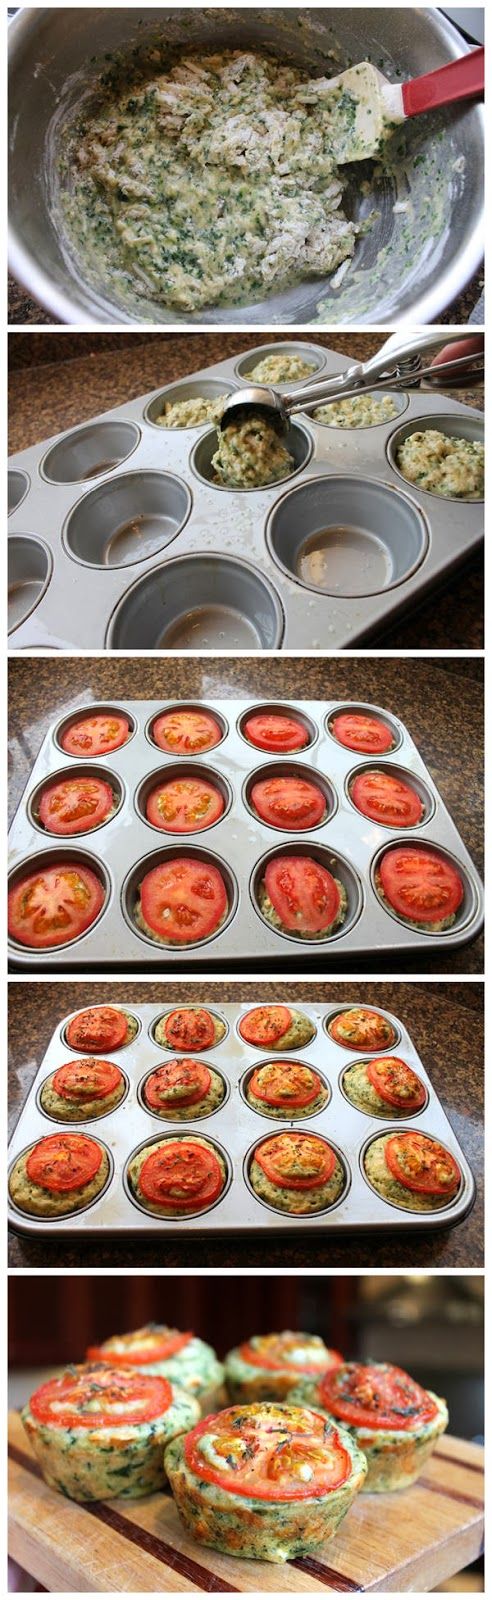 Low carb spinach and cheese muffin.